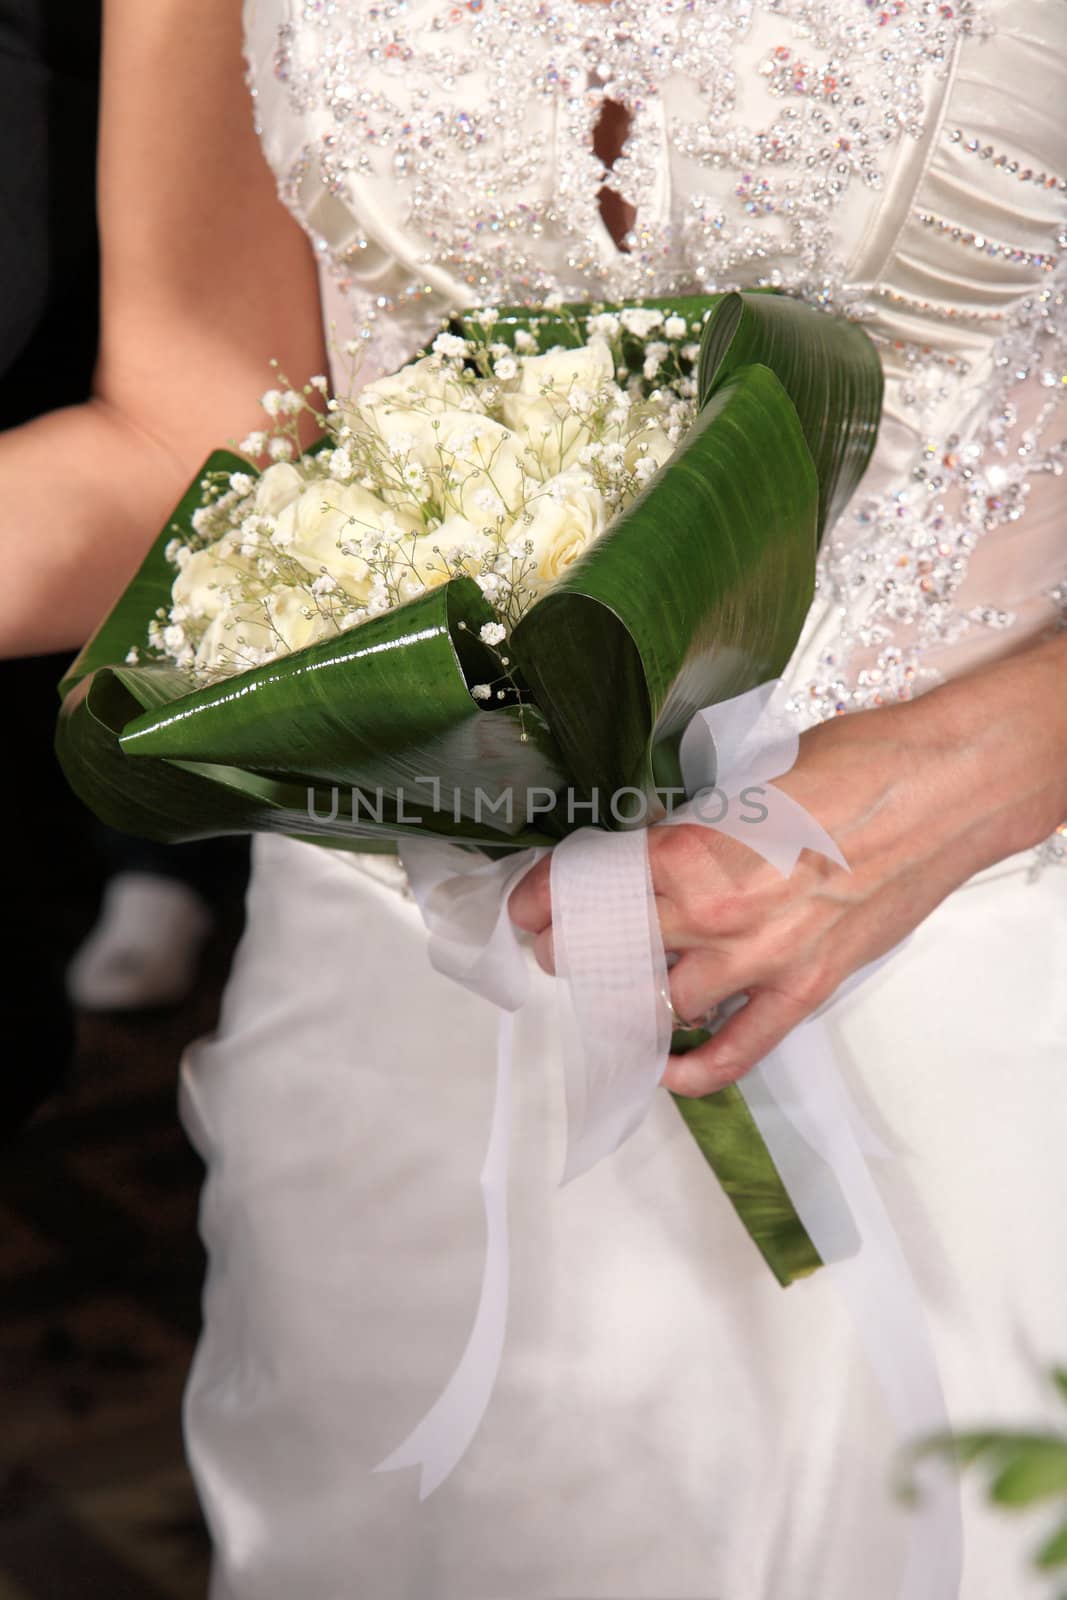 Bride holding her bouquet at the wedding